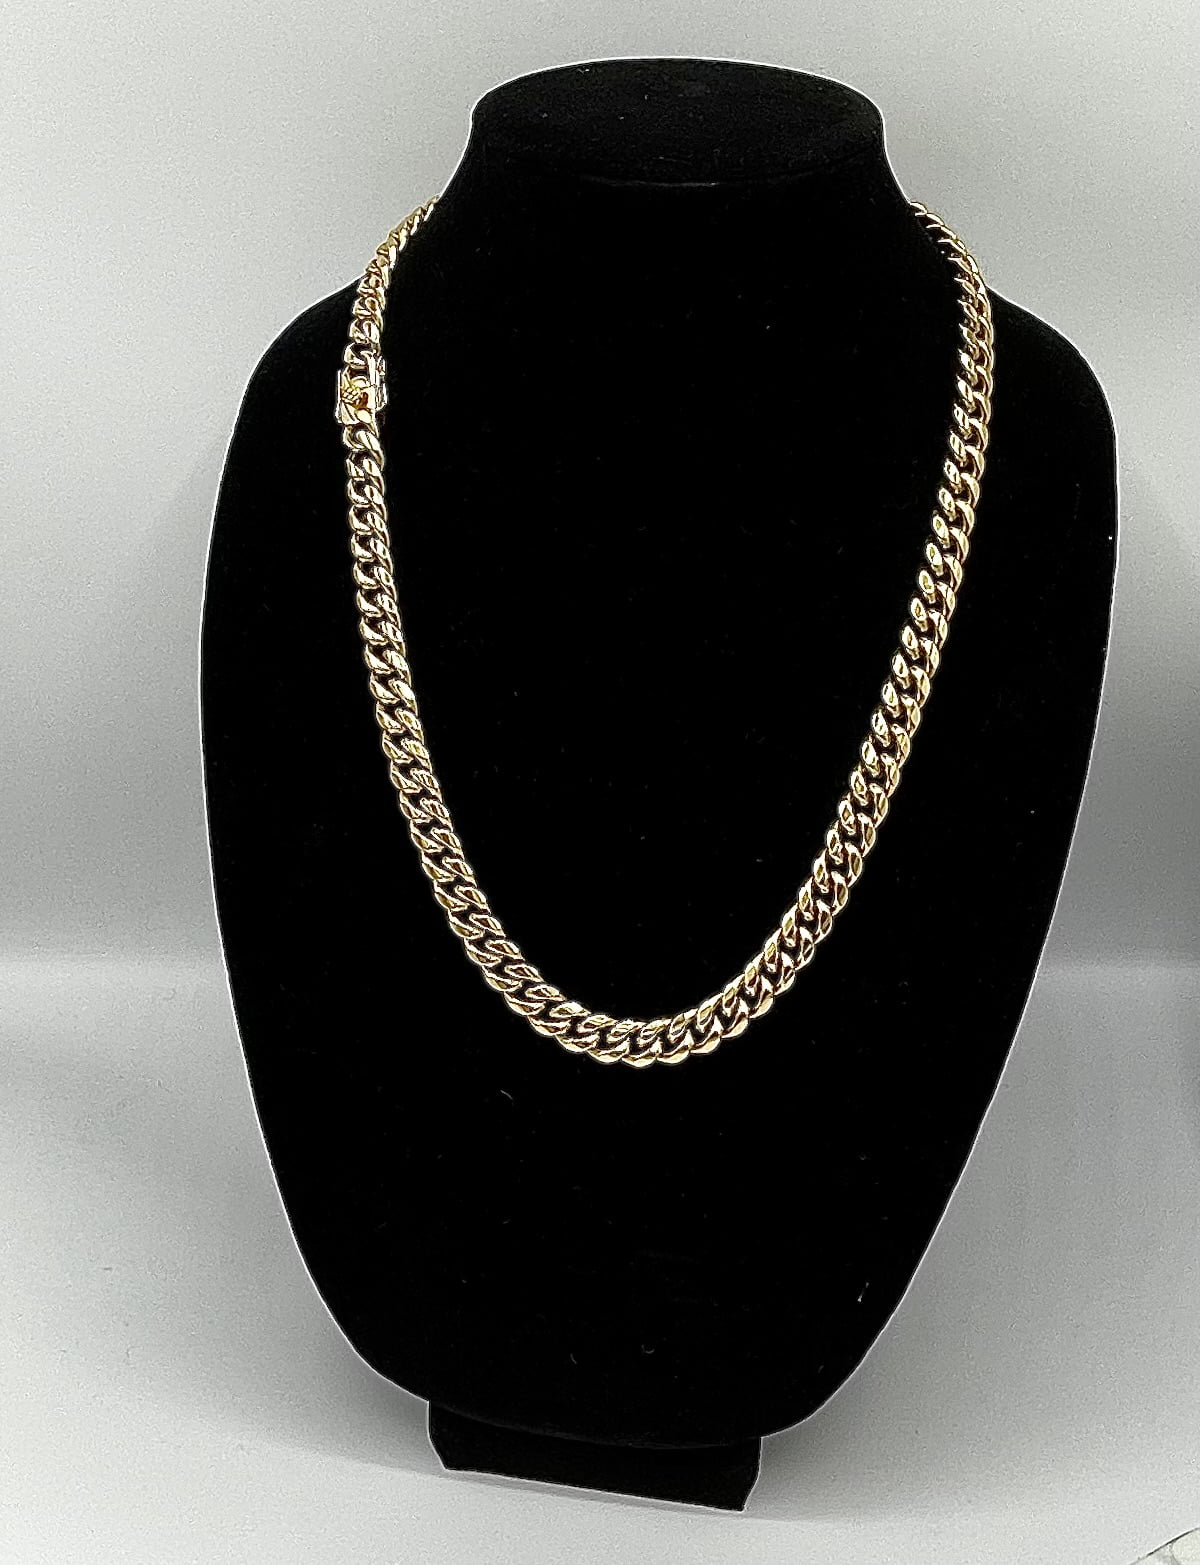 1 Pure Copper Necklace Cuban Link 24 Heavy Solid Statement Jewelry Chain  Unisex